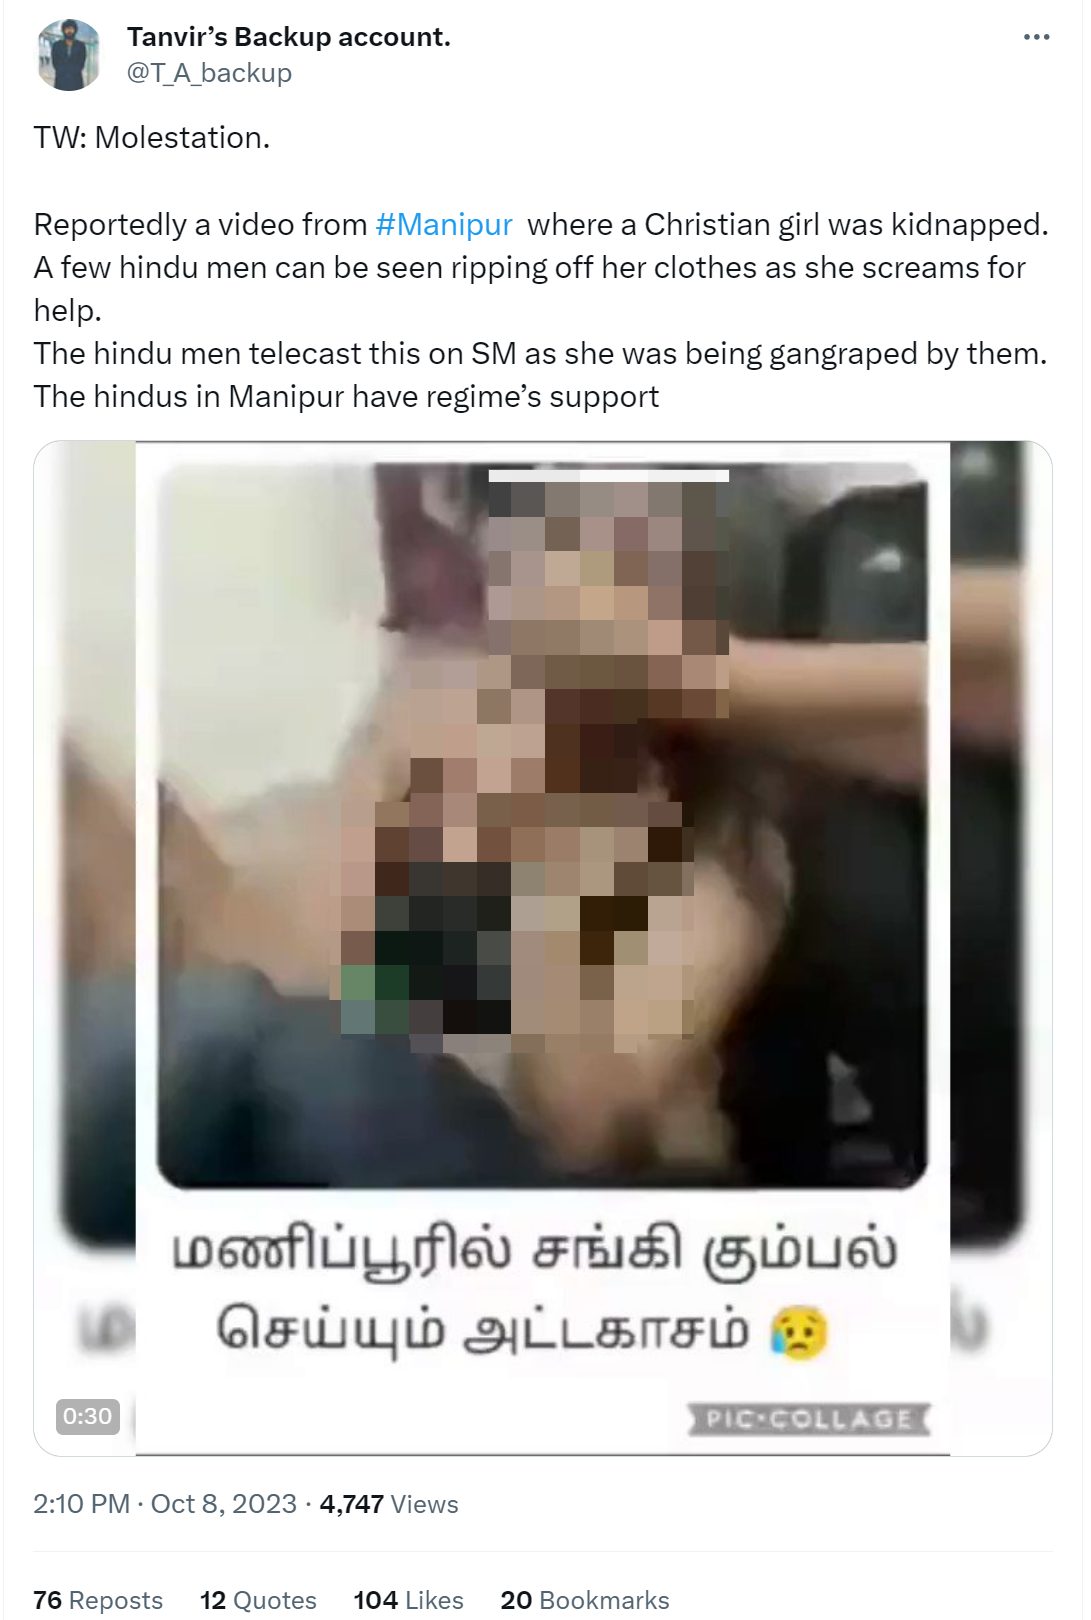 Bangladeshi Real Rape Video - Old video of sexual assault case in Bengaluru involving Bangladeshis viral  as recent incident in Manipur - Alt News